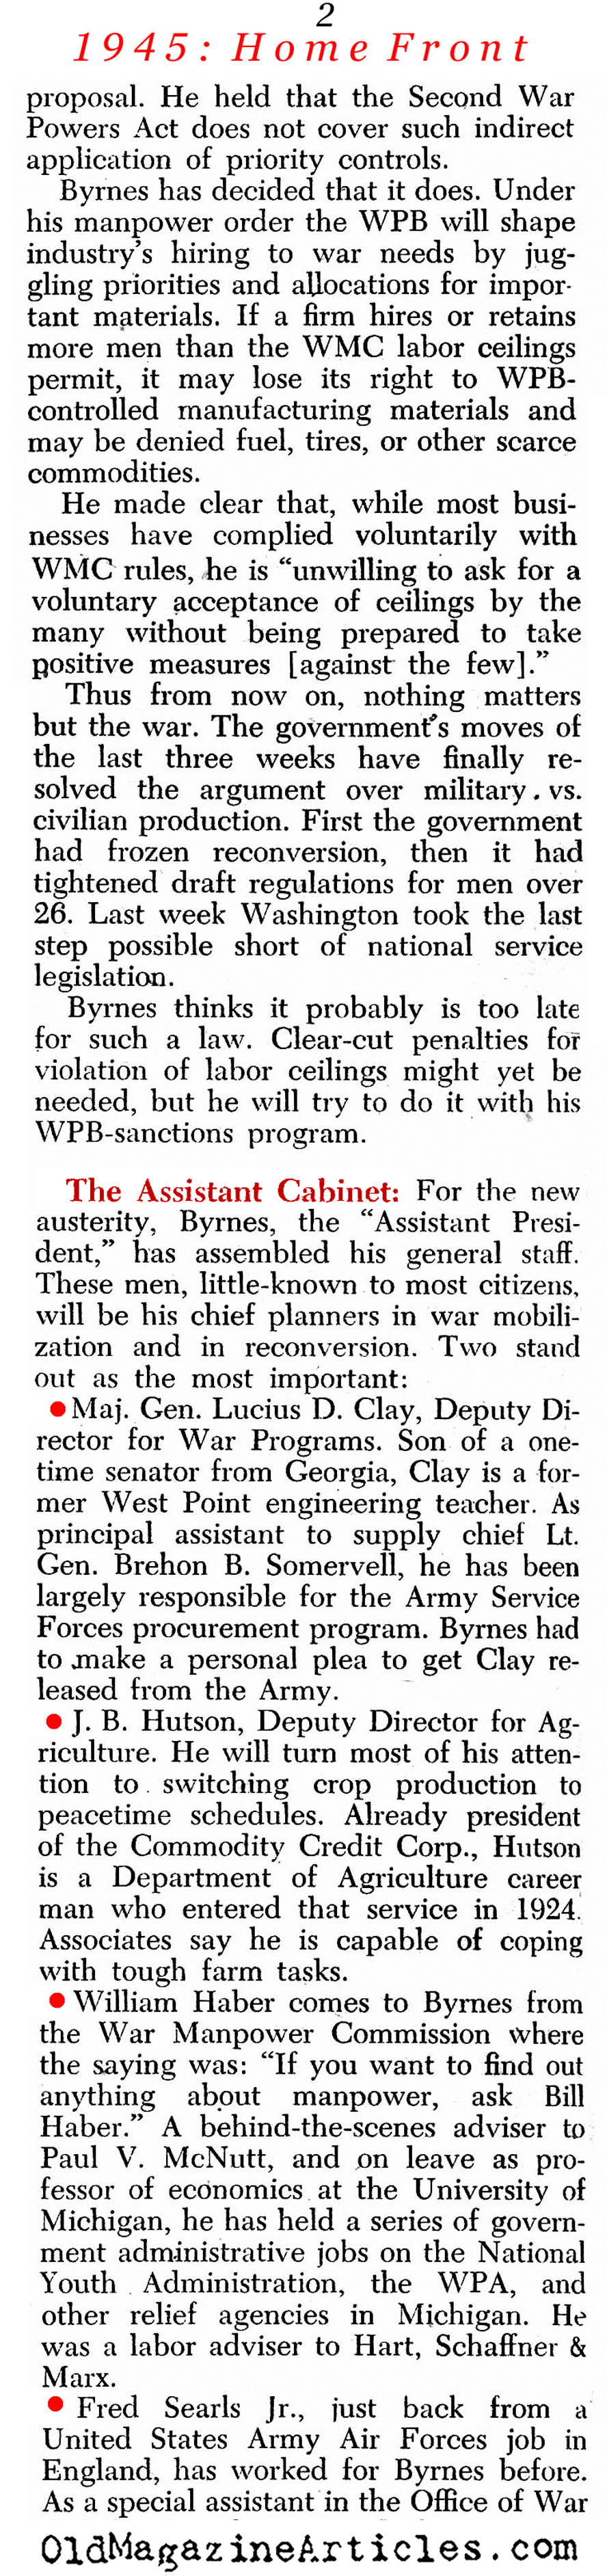 More Restrictions for 1945 (Newsweek Magazine, 1945)